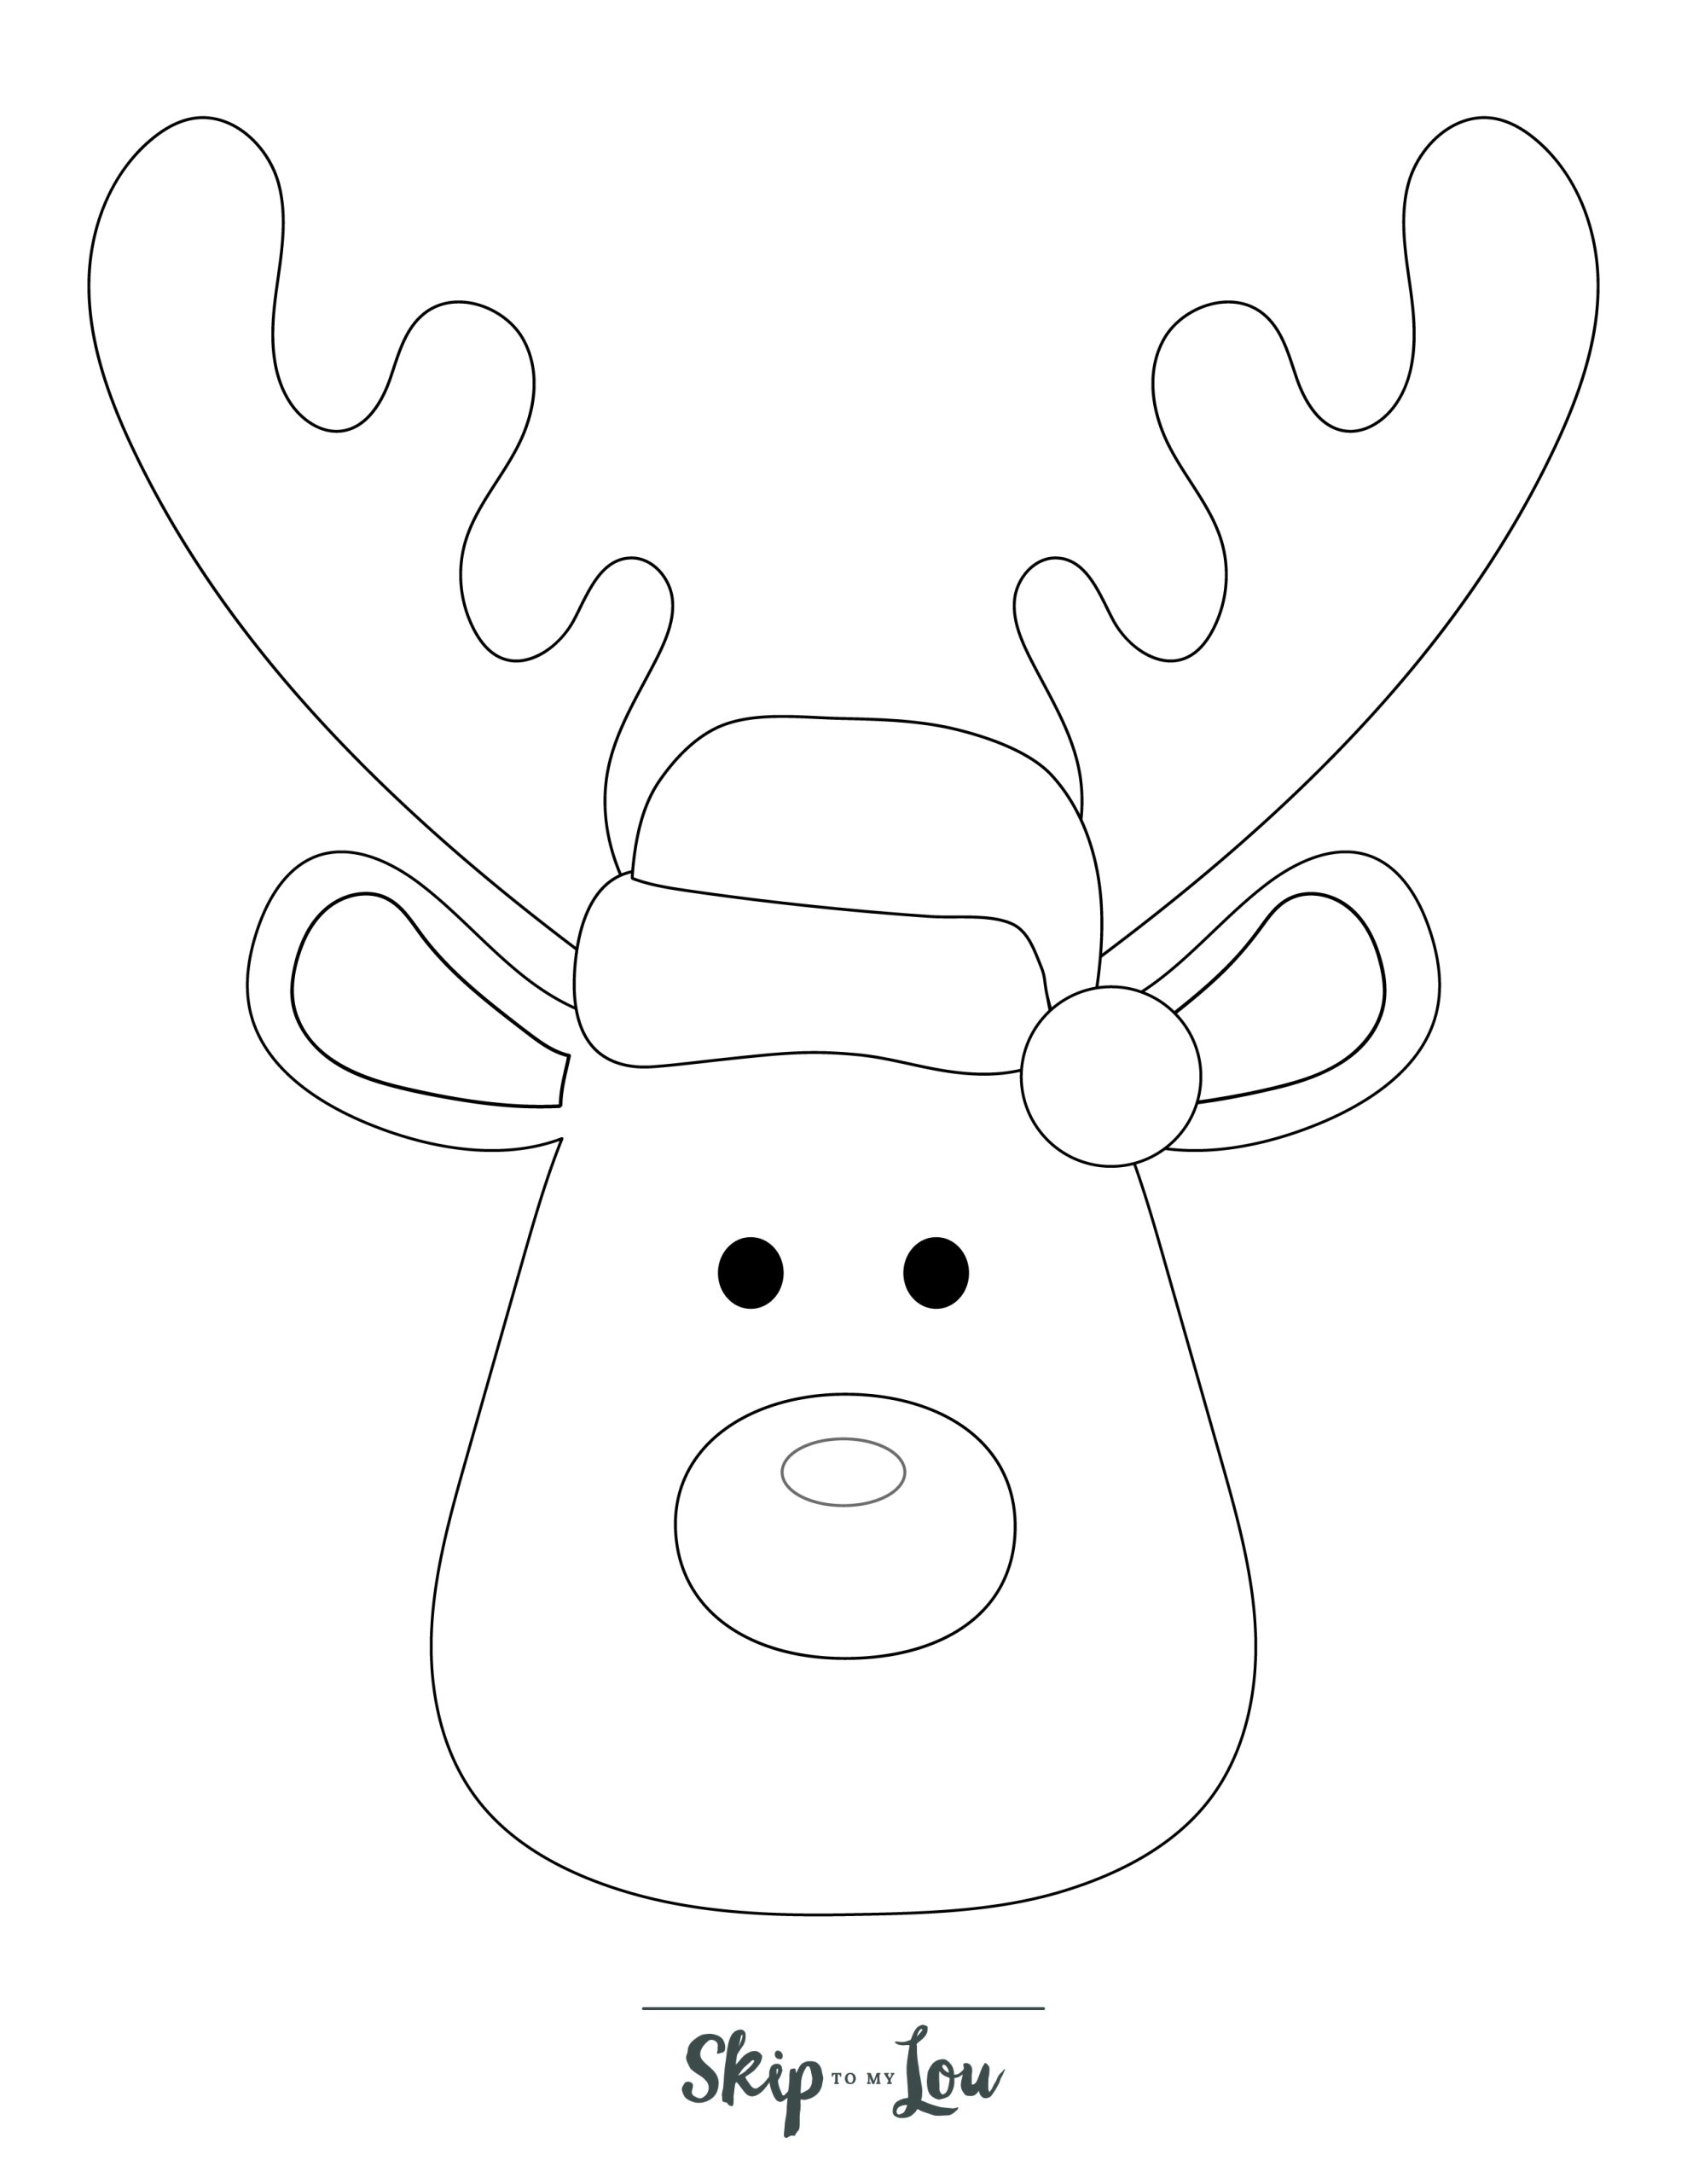 Reindeer Coloring Page 9 - Line drawing of a reindeer wearing a christmas hat